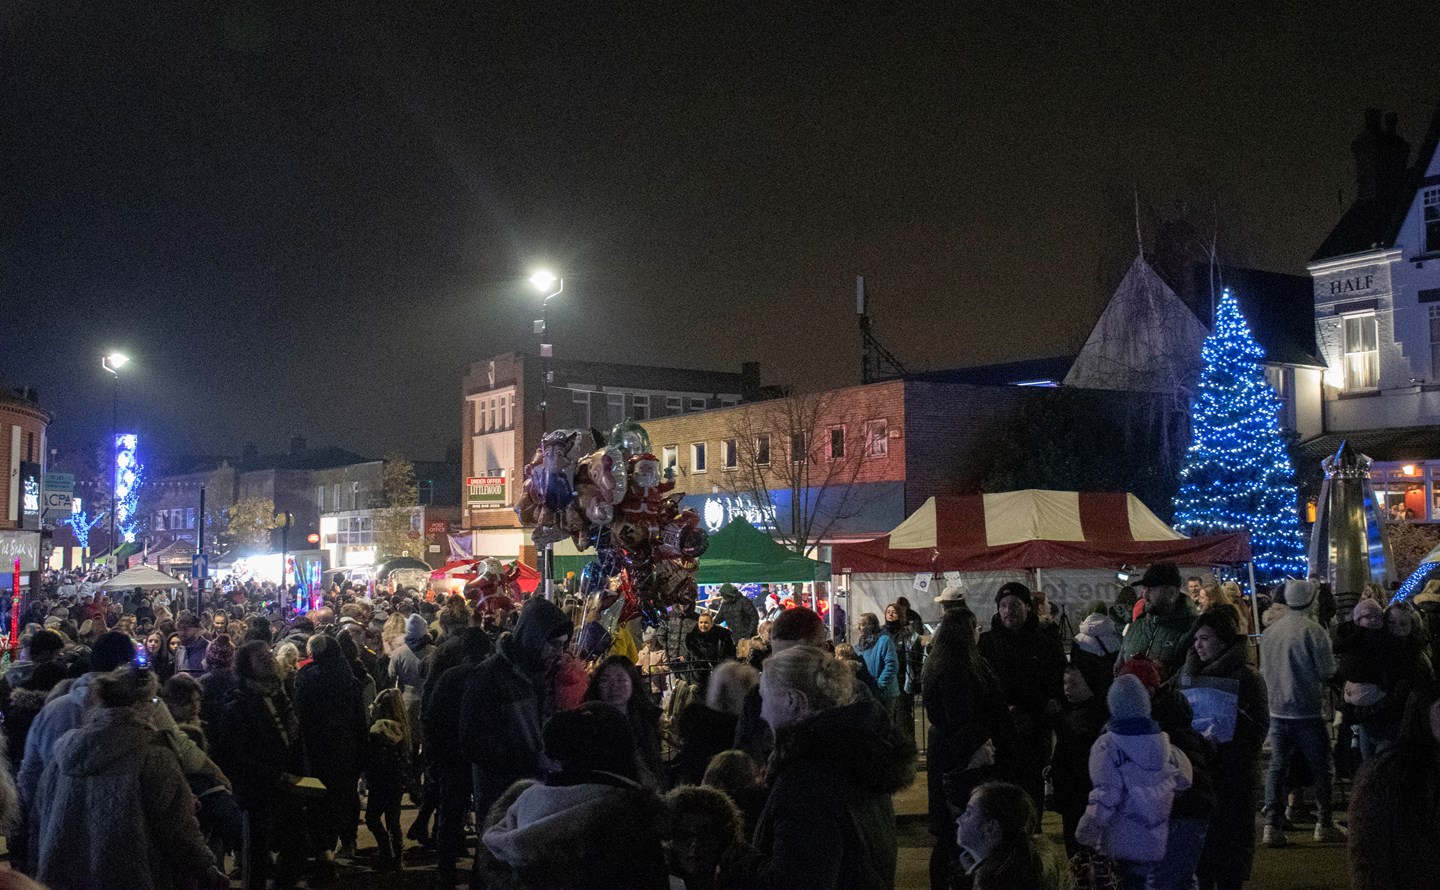 Crowds on Hucknall High Street at the Christmas light switch on event 